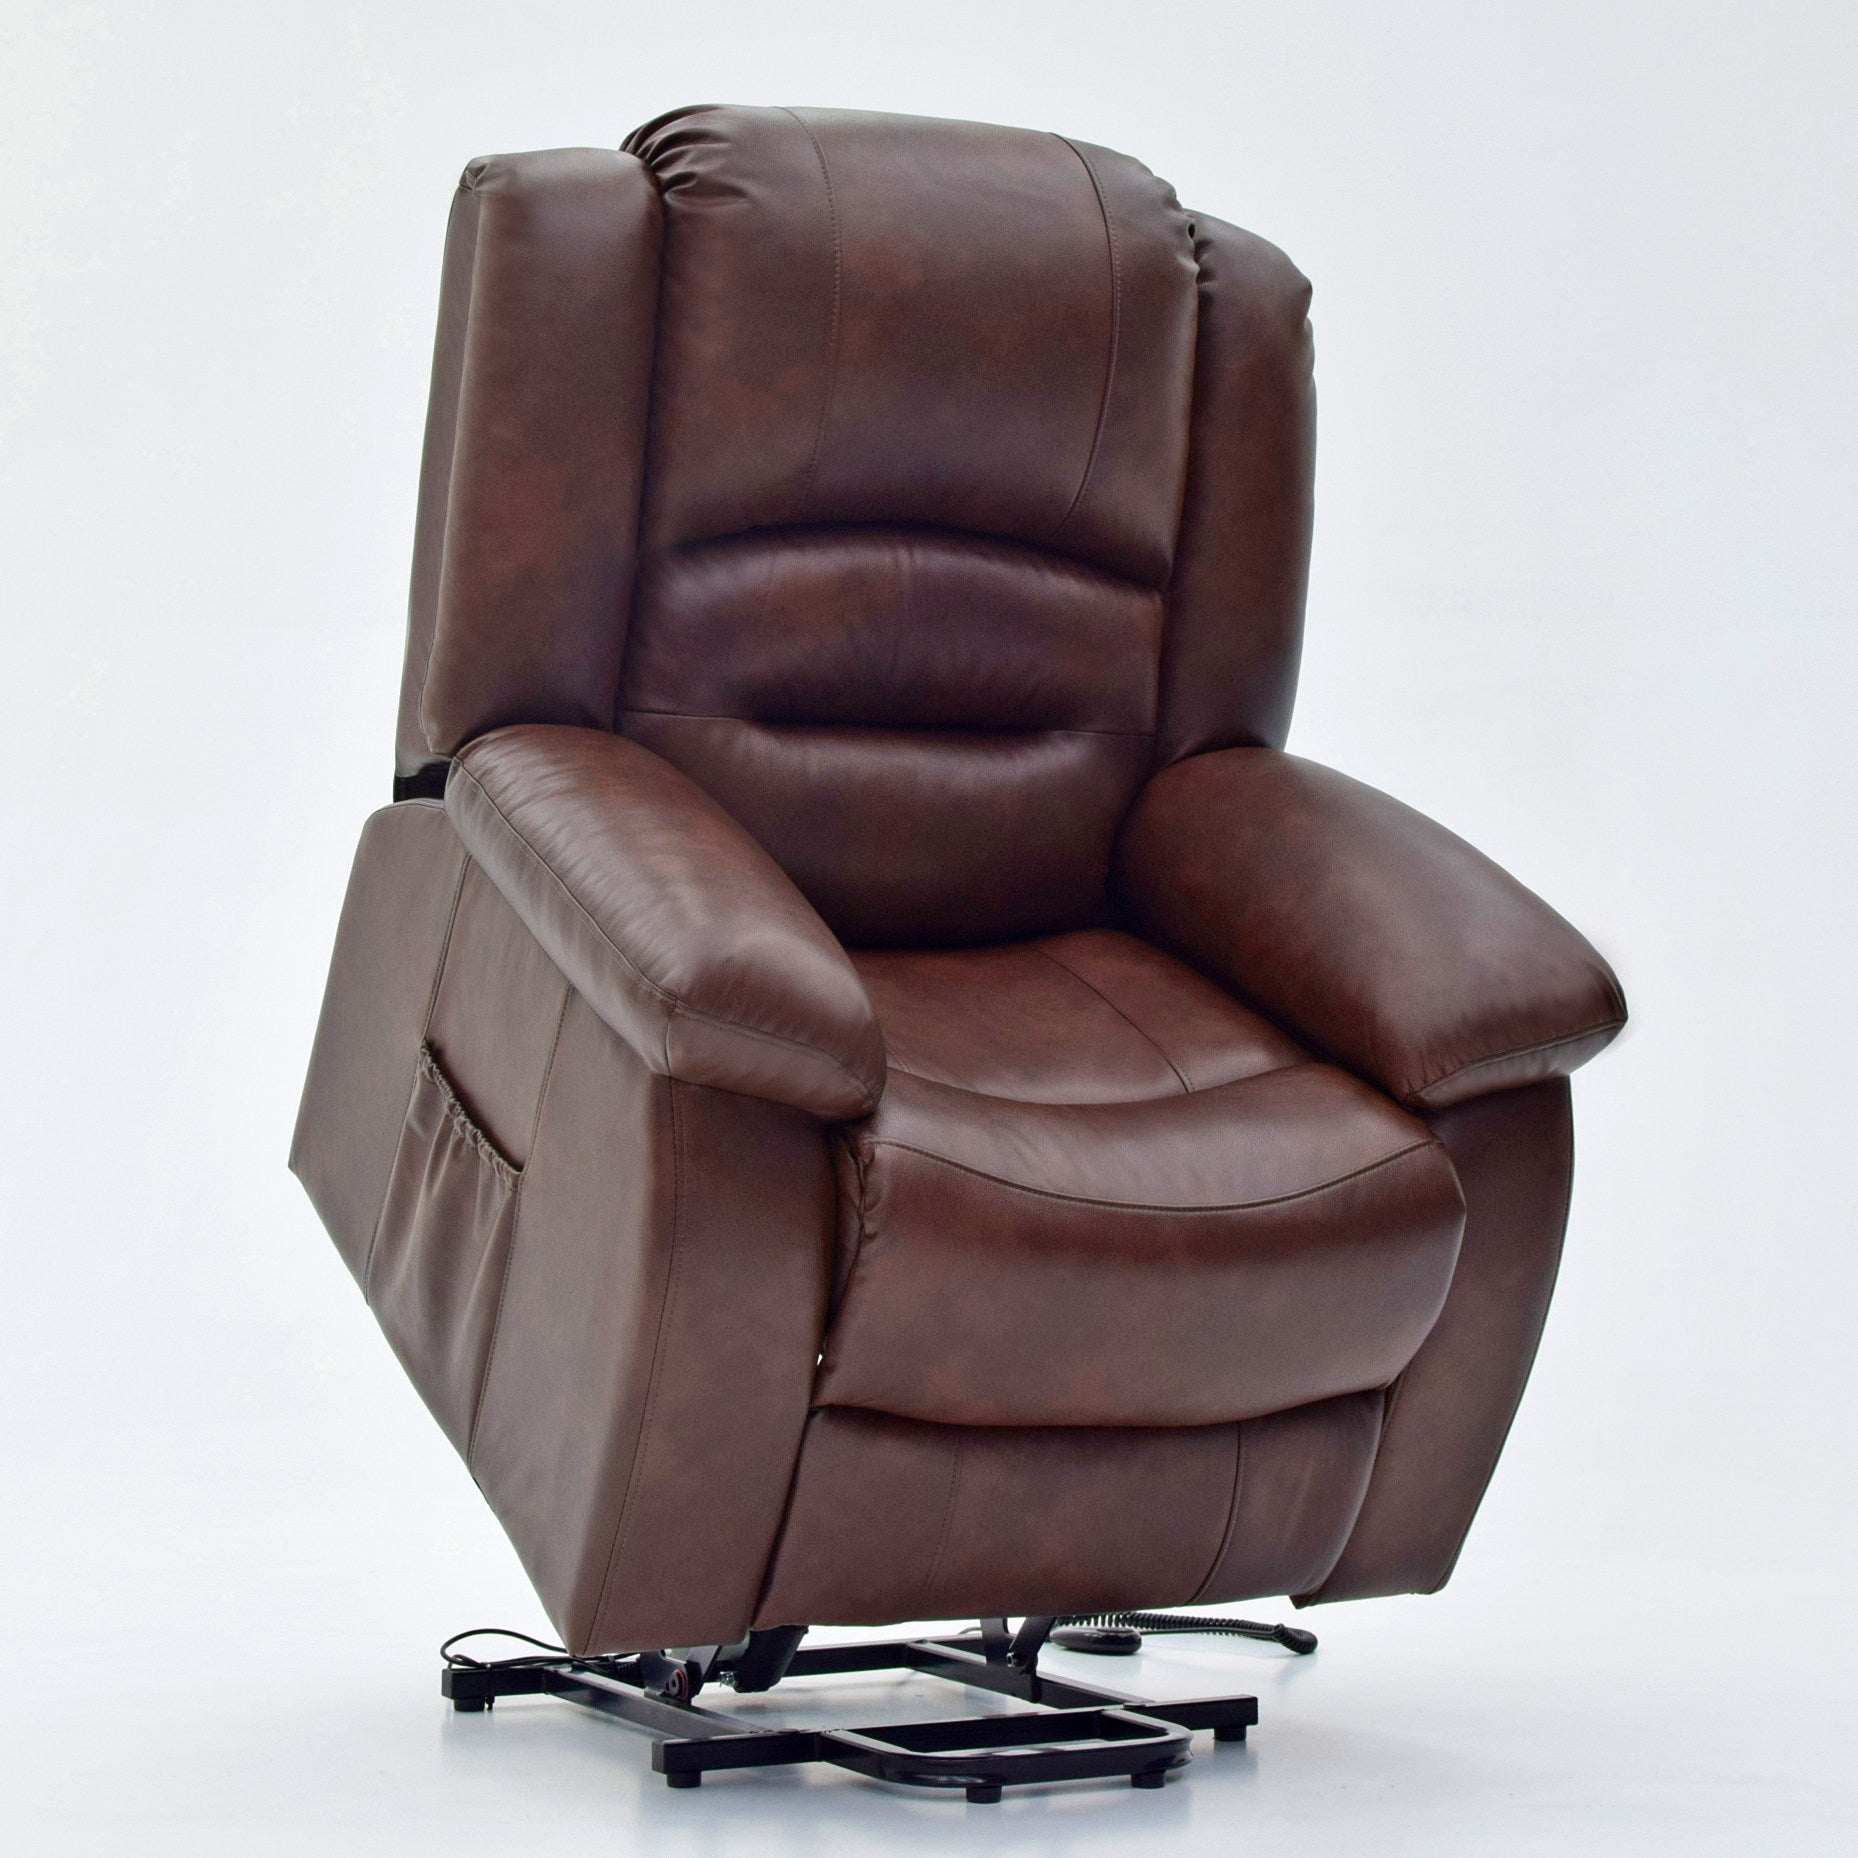 MAGIC UNION Power Lift Recliner Chairs for Elderly, Electric Heated Massage  Sofa with Overstuffed Design, PU Leather Lift Chairs Reclining Chair for